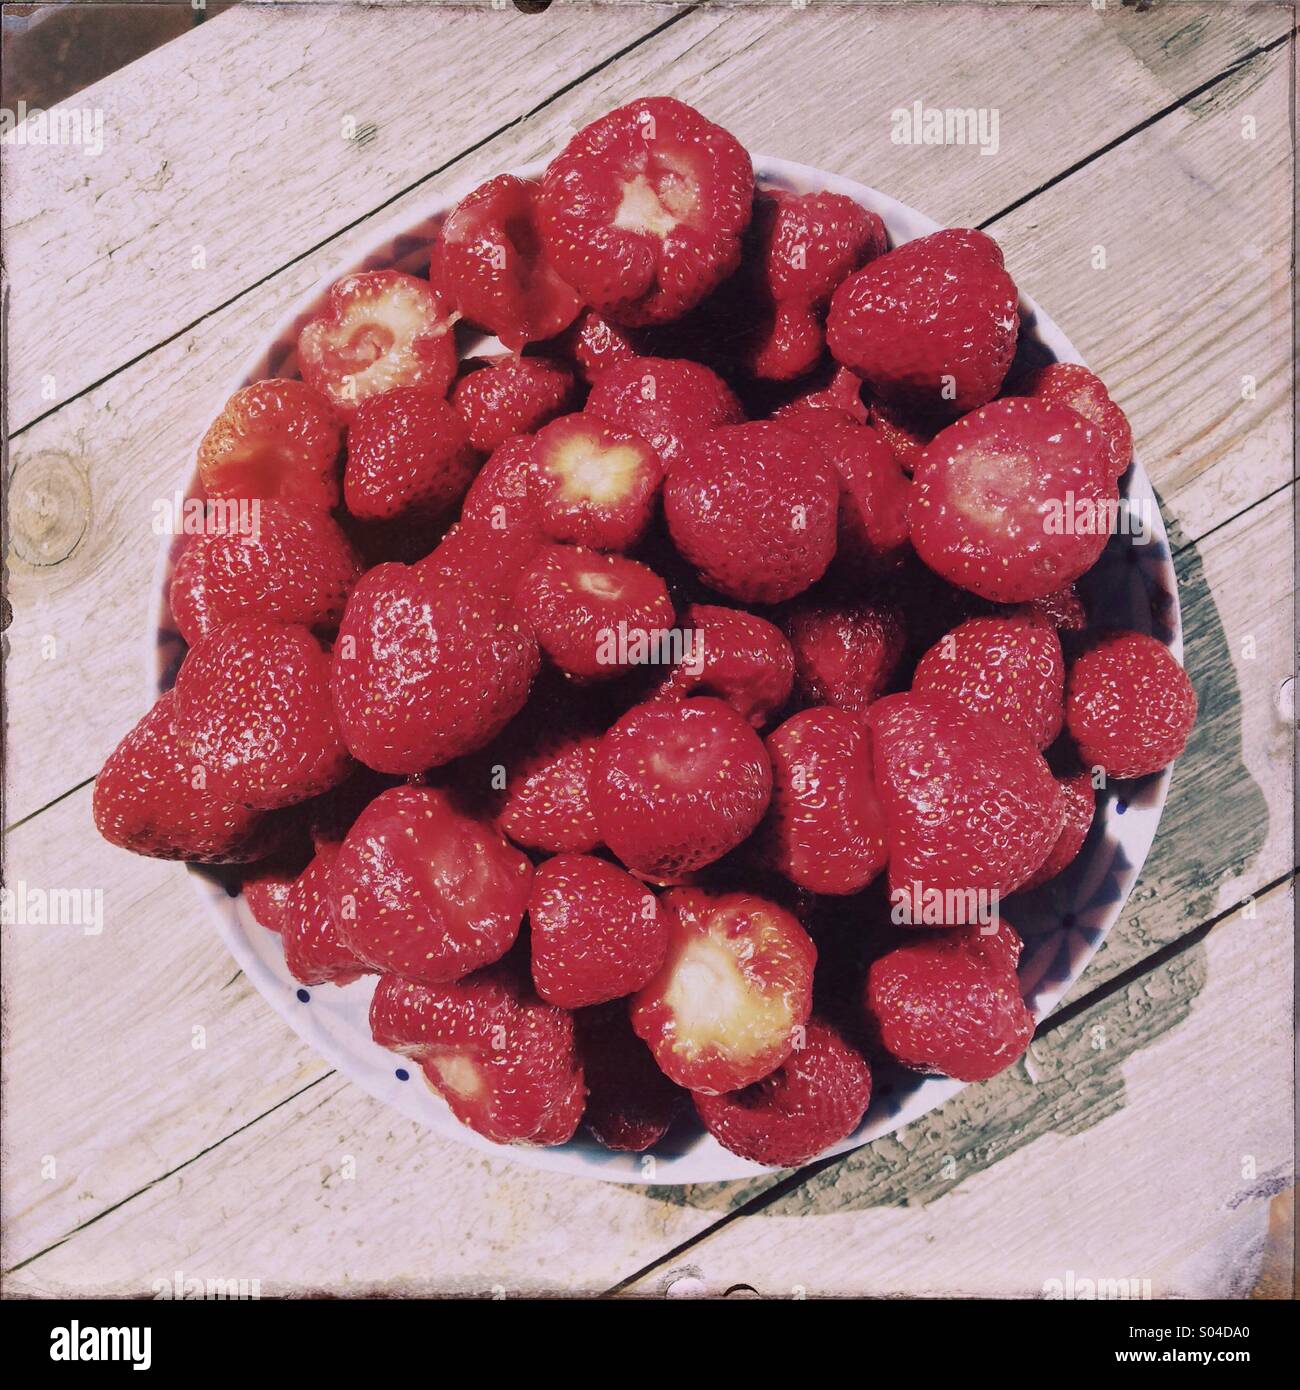 A bowl of strawberries is seen. Stock Photo